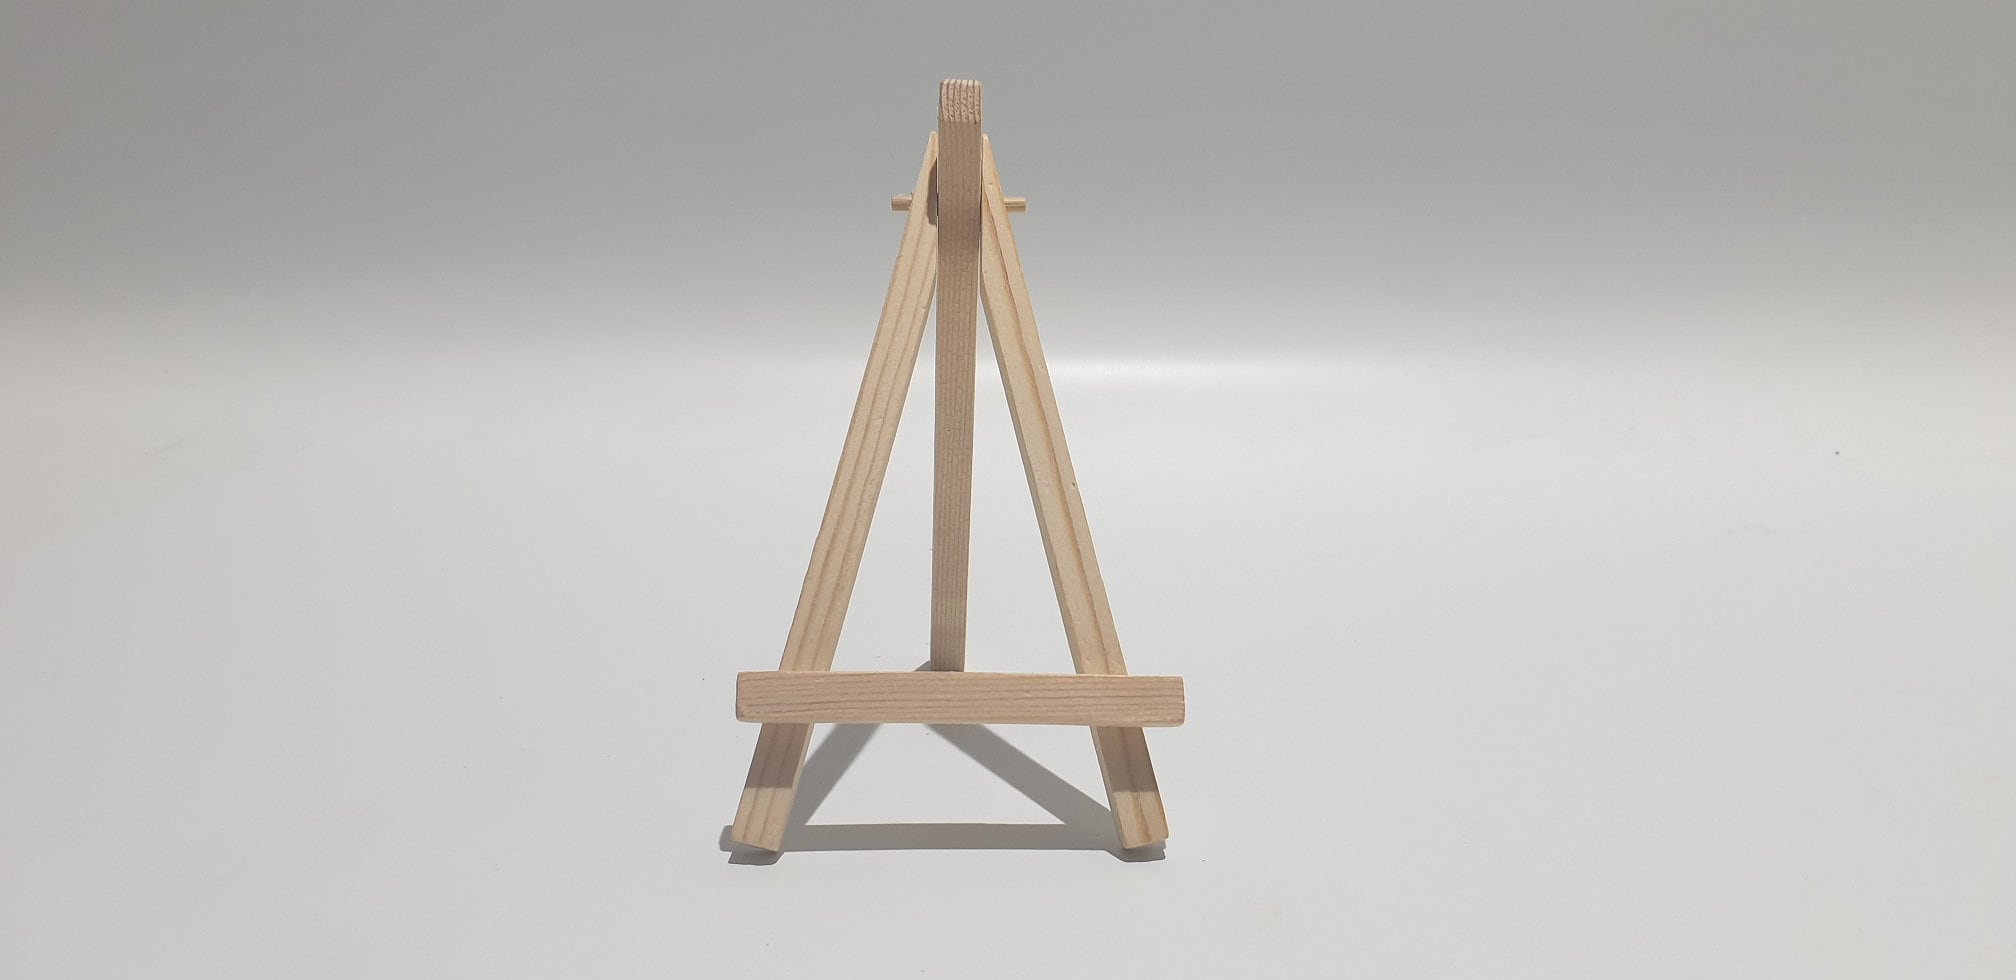 high quality 8*15cm mini easel with